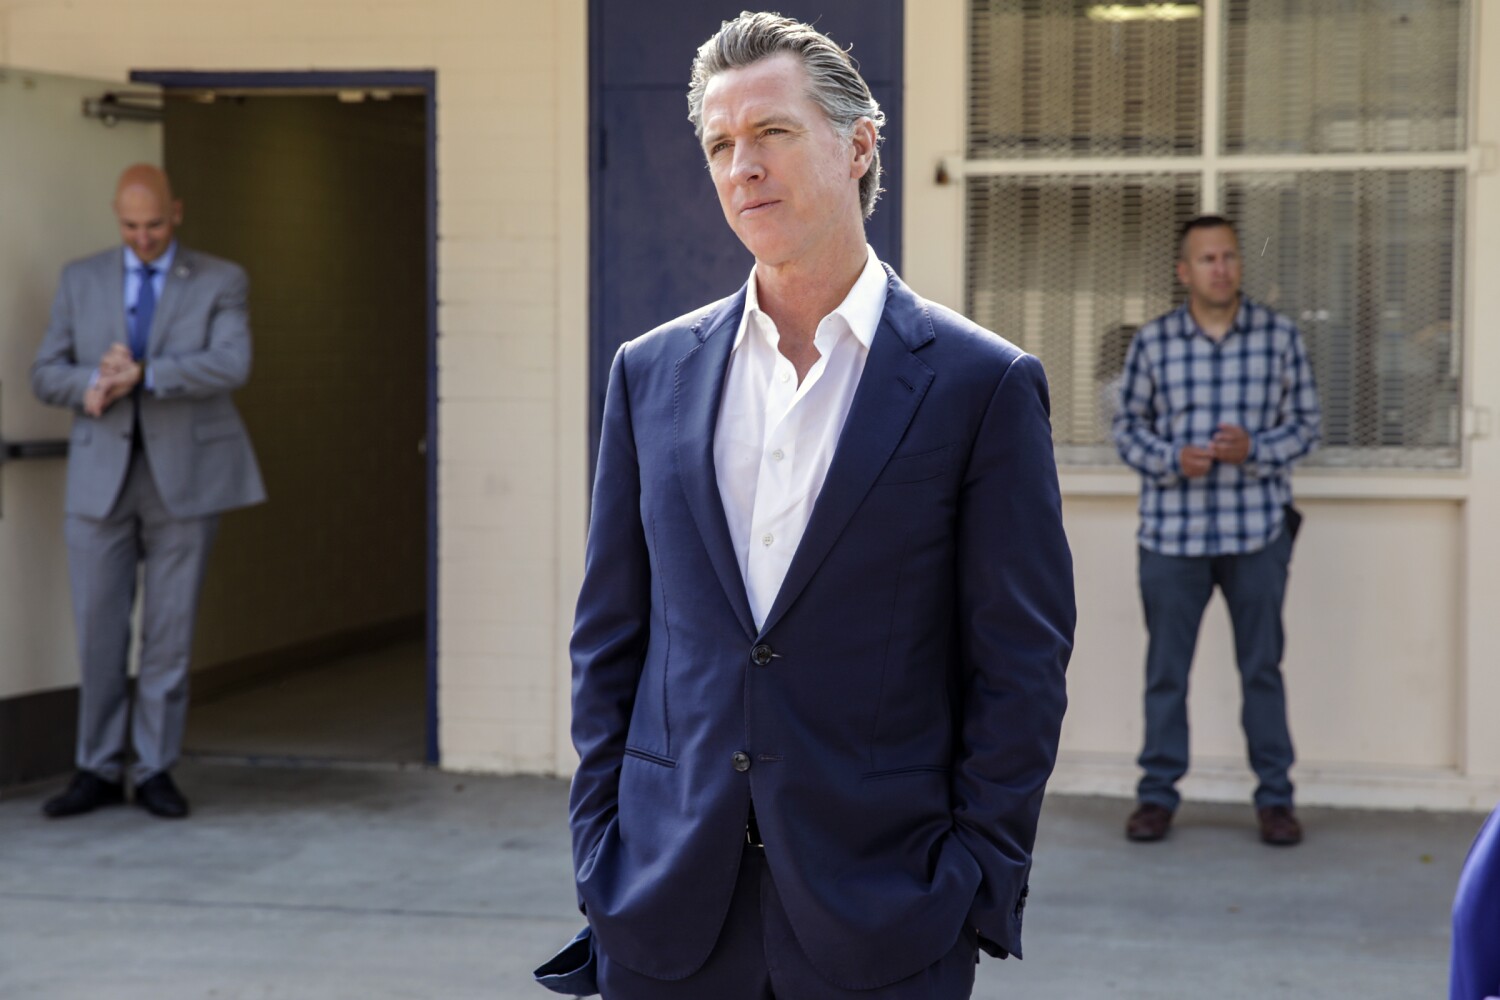 Newsom can call recall proponents 'Republicans and Trump supporters,' judge rules